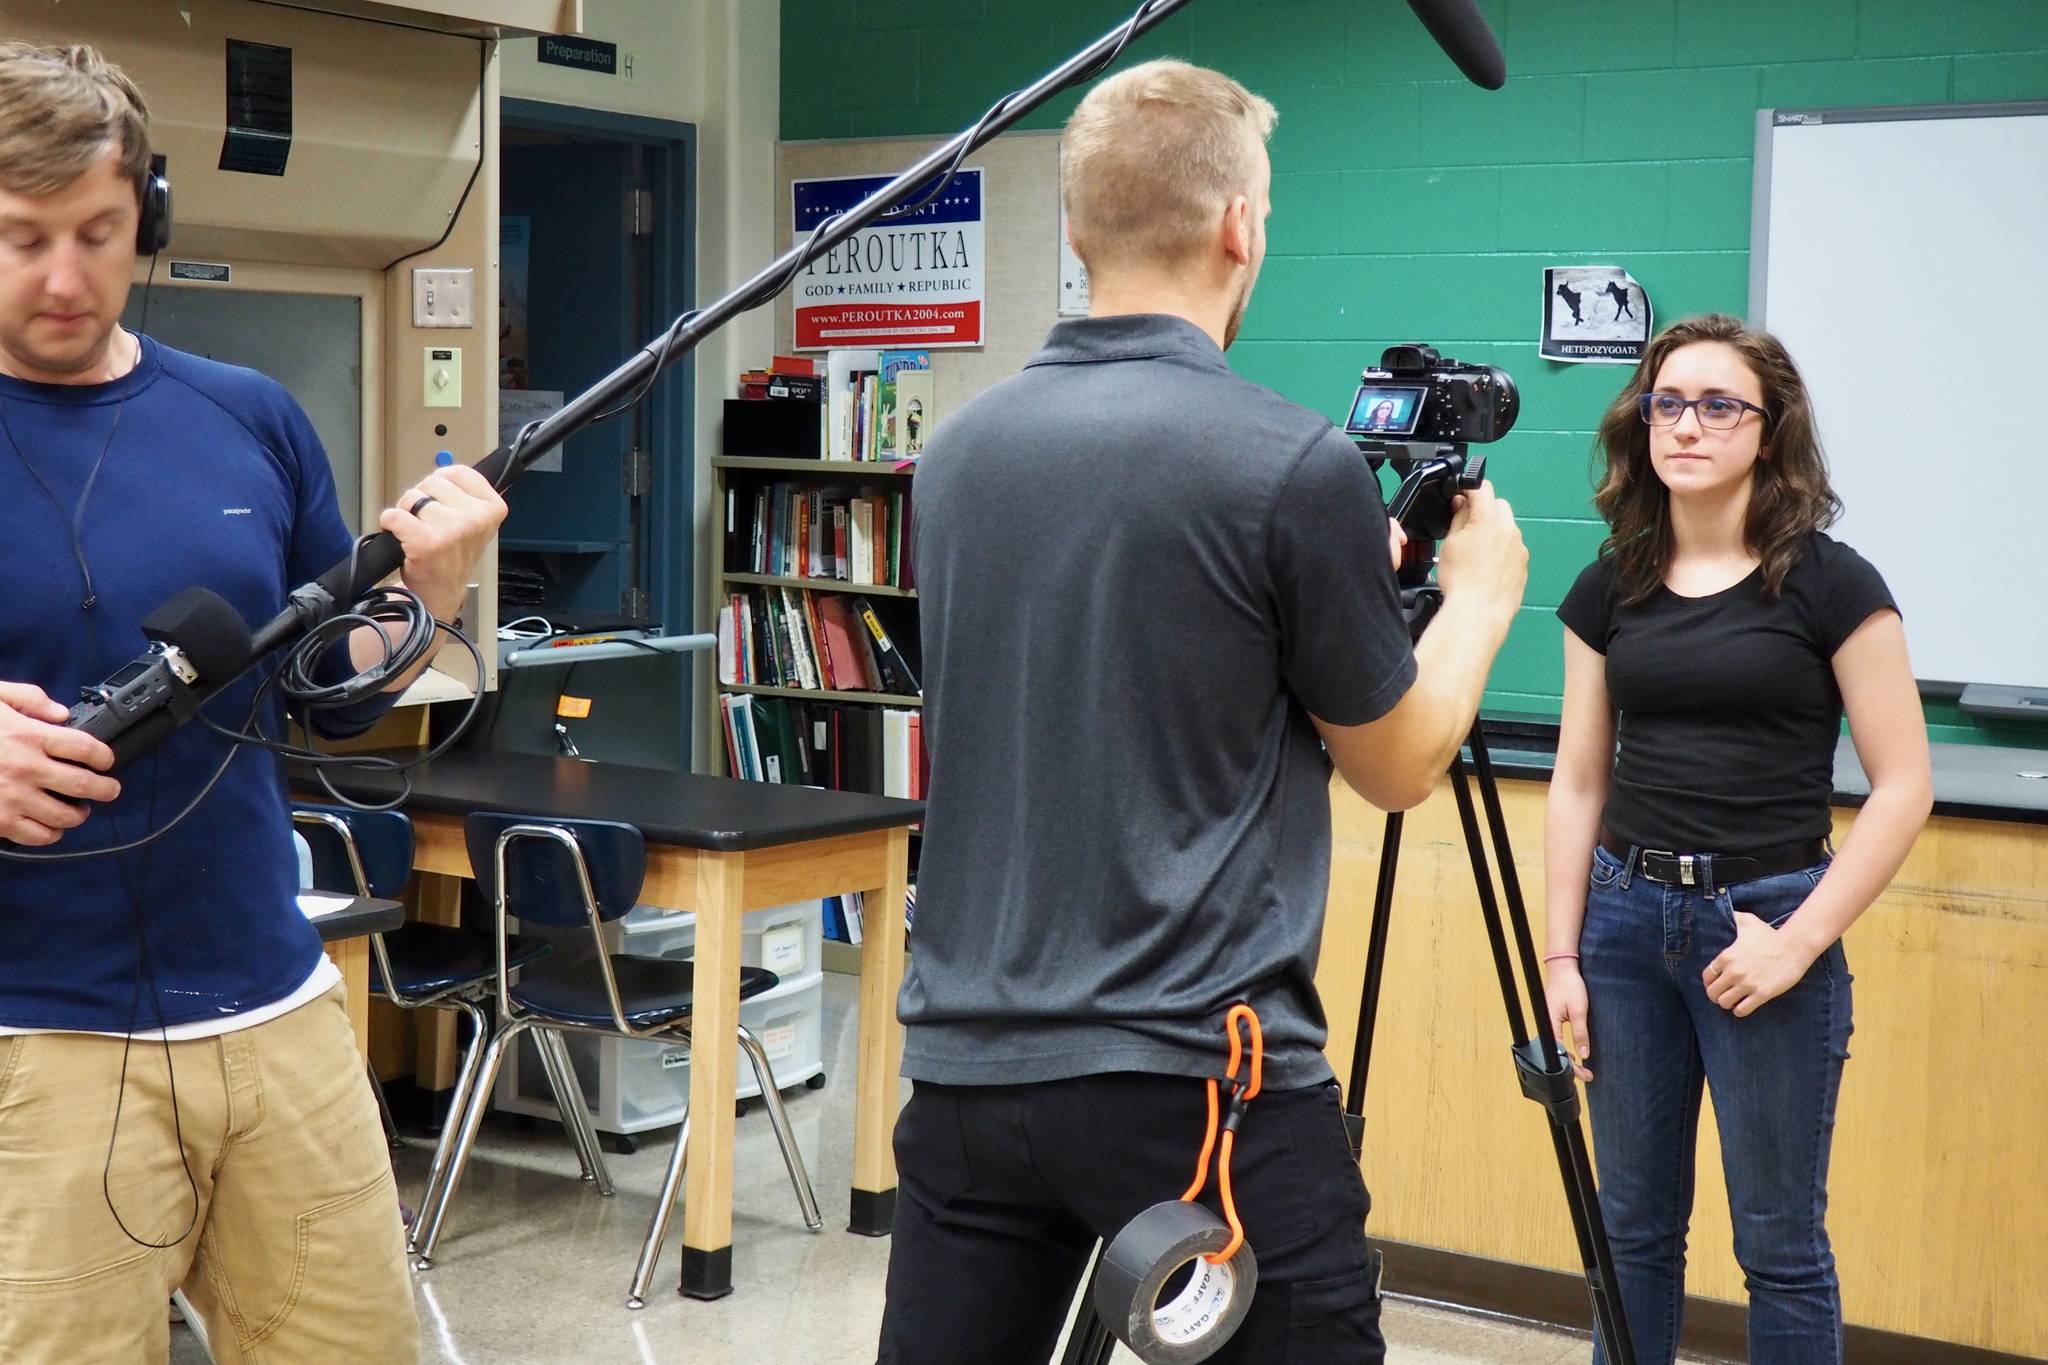 Silas Firth and Michael Miller help shoot a promo video about the Nikiski Children’s Fund with the founder, Carlee Rizzo, in this undated photo. (Photo courtesy of Joseph Rizzo).